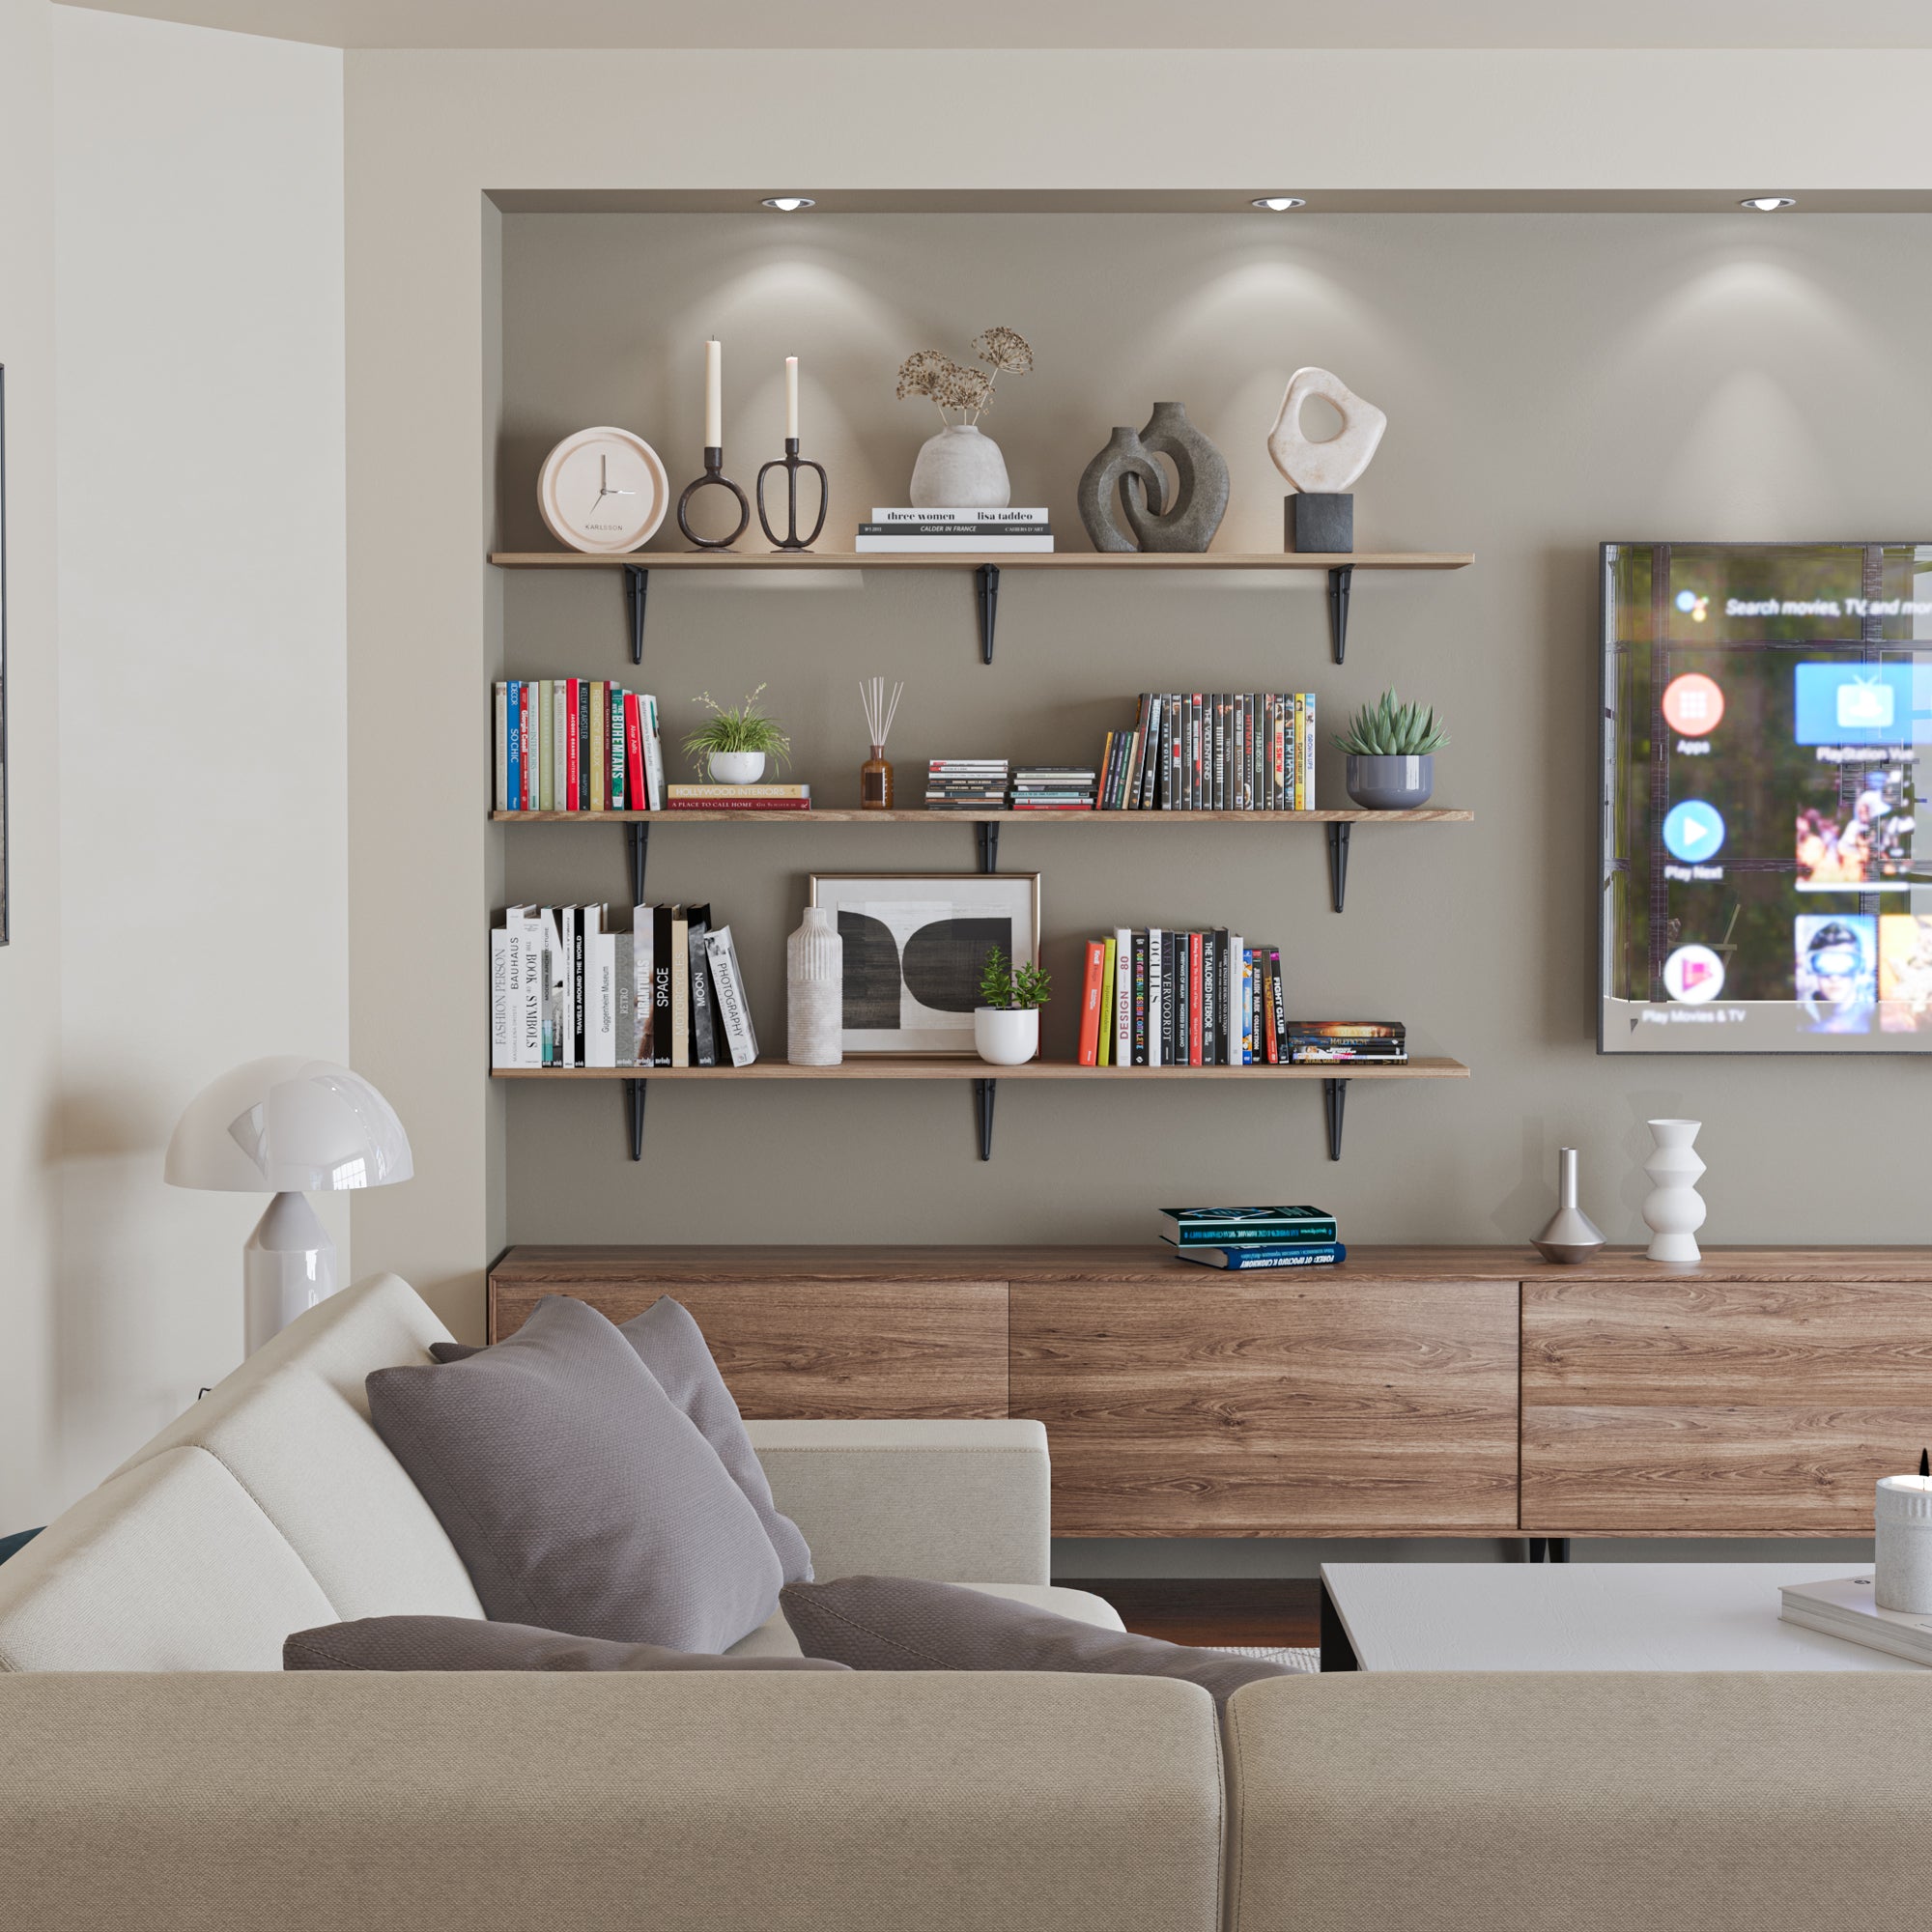 Cozy living space featuring display shelves with books, decorative items, and soft lighting above a modern TV setup.